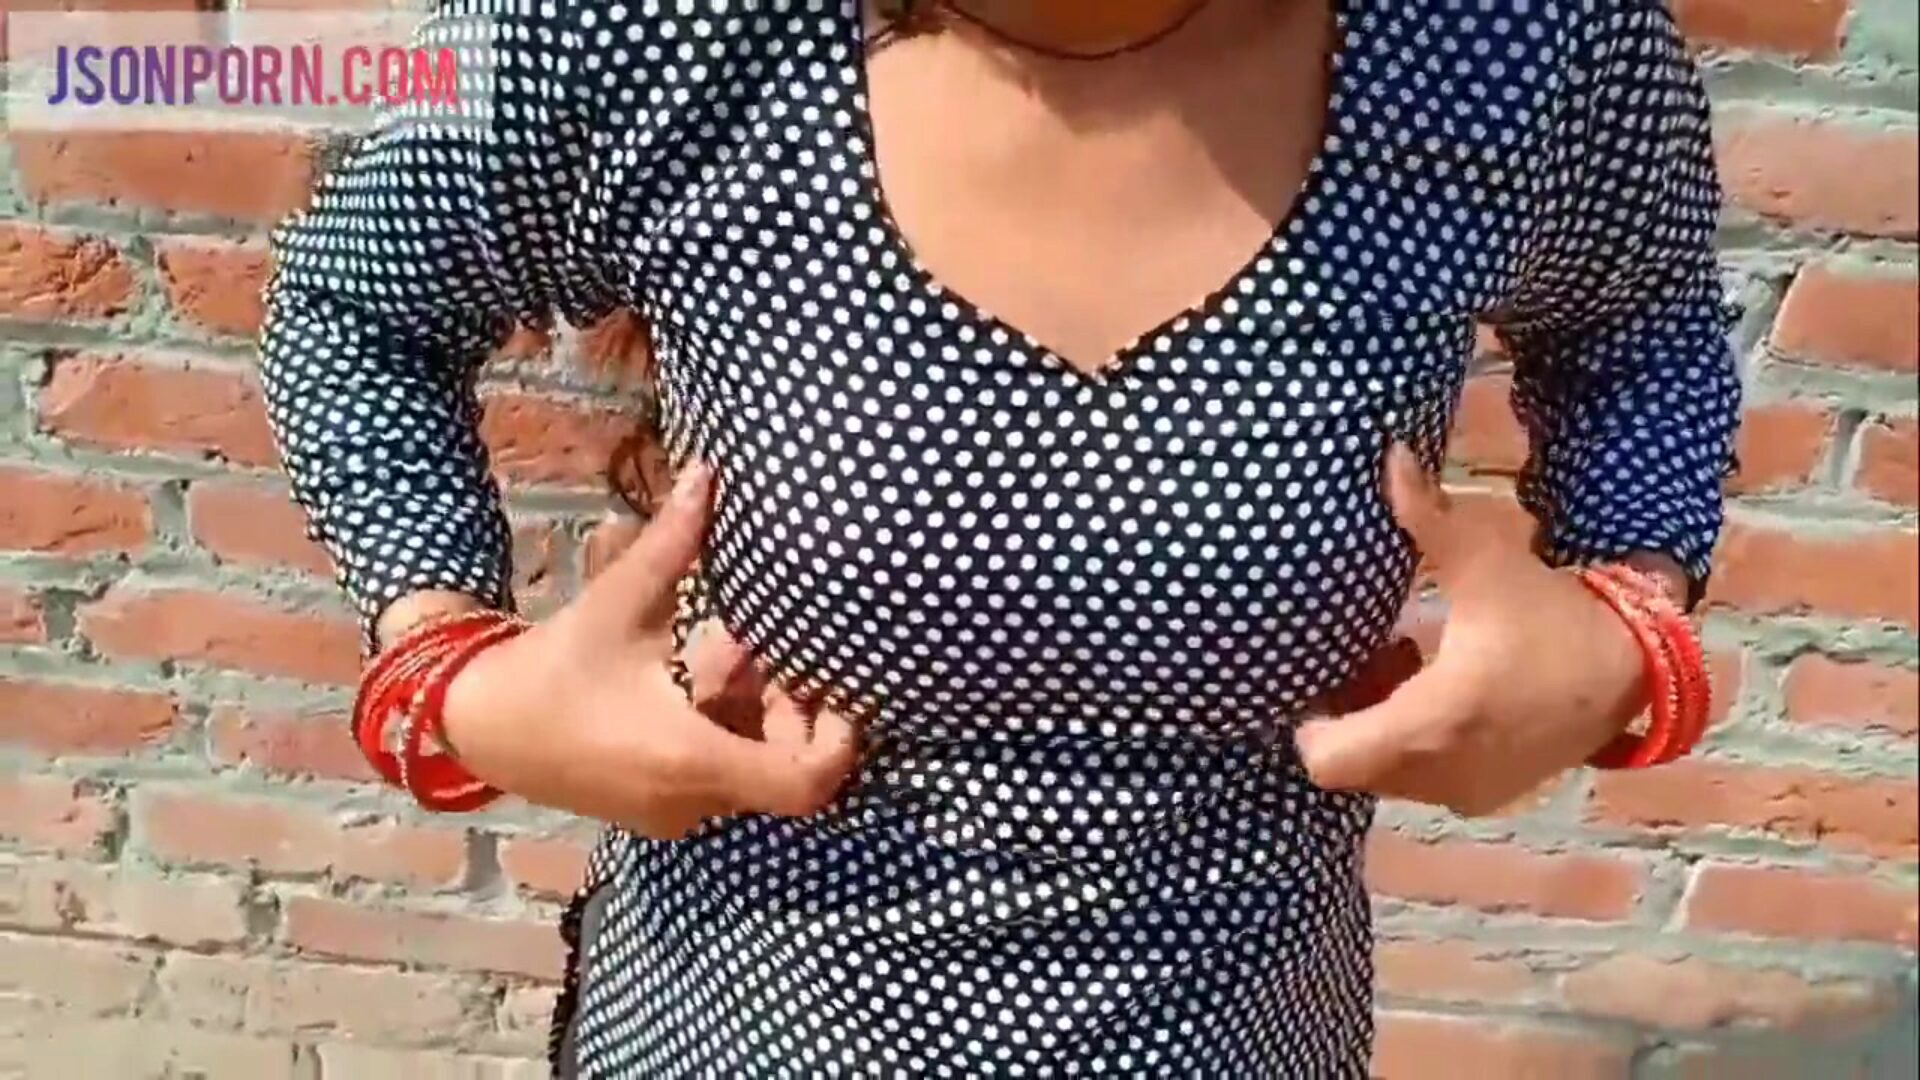 Desi Bhabhi pumping with devar on Terrace Watch Desi Bhabhi Fuck with devar on Terrace  bhabhi can't live without to suck jock and doing assfucking devar can't live without bhabhi very much so he pummel bhabhi on terrace  Json Porn